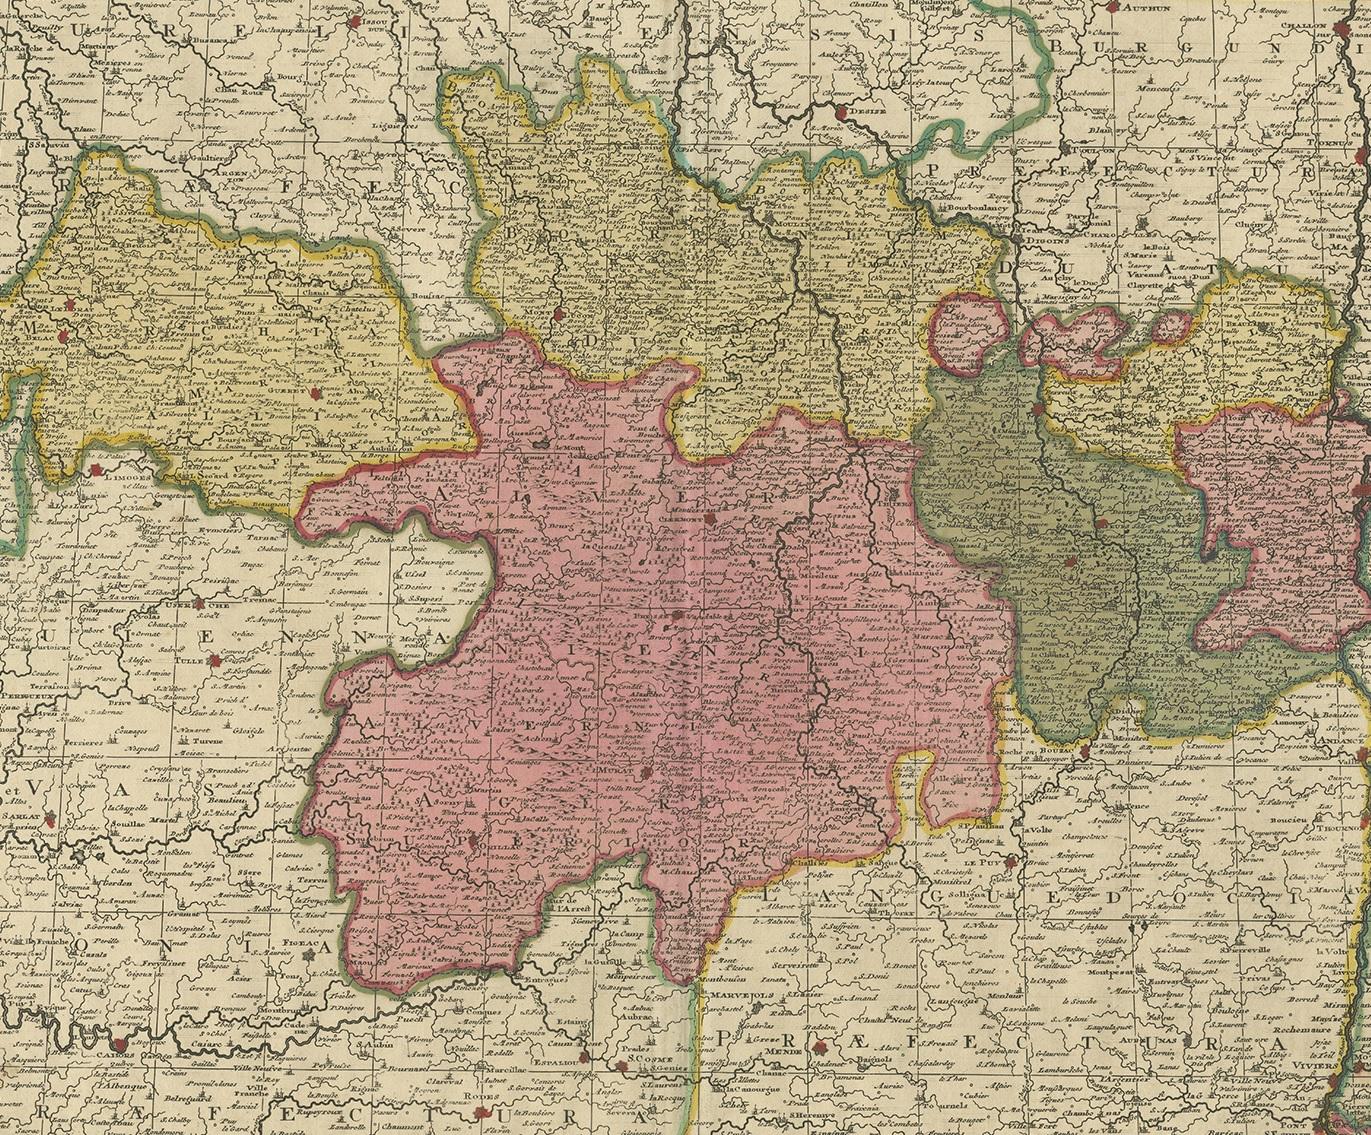 Antique map titled 'Praefectura Lugdunensis Generalis'. Detailed map of the Auvergne-Rhône-Alpes region in the southeast of France. To the east the Rhône from Chalon-sur-Saône, Mâcon, Lyon, Valence to Montélimar. To the west Argenton-sur-Creuse and